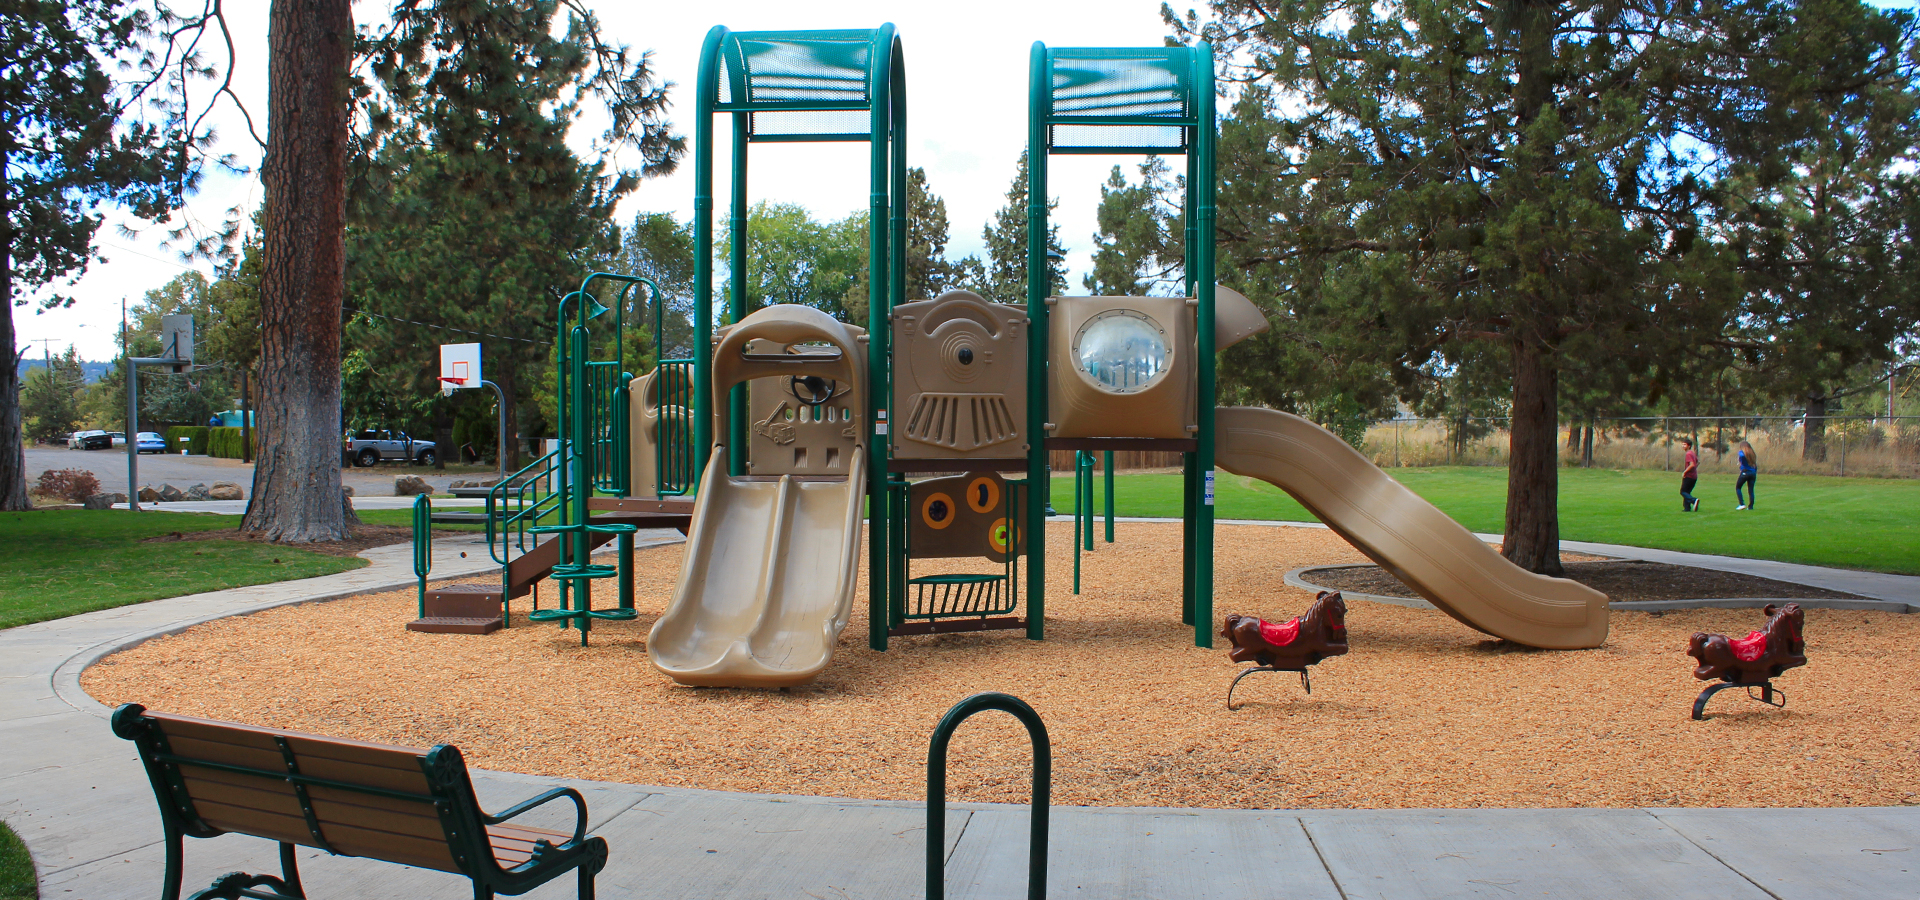 The play structure at Jaycee Park.